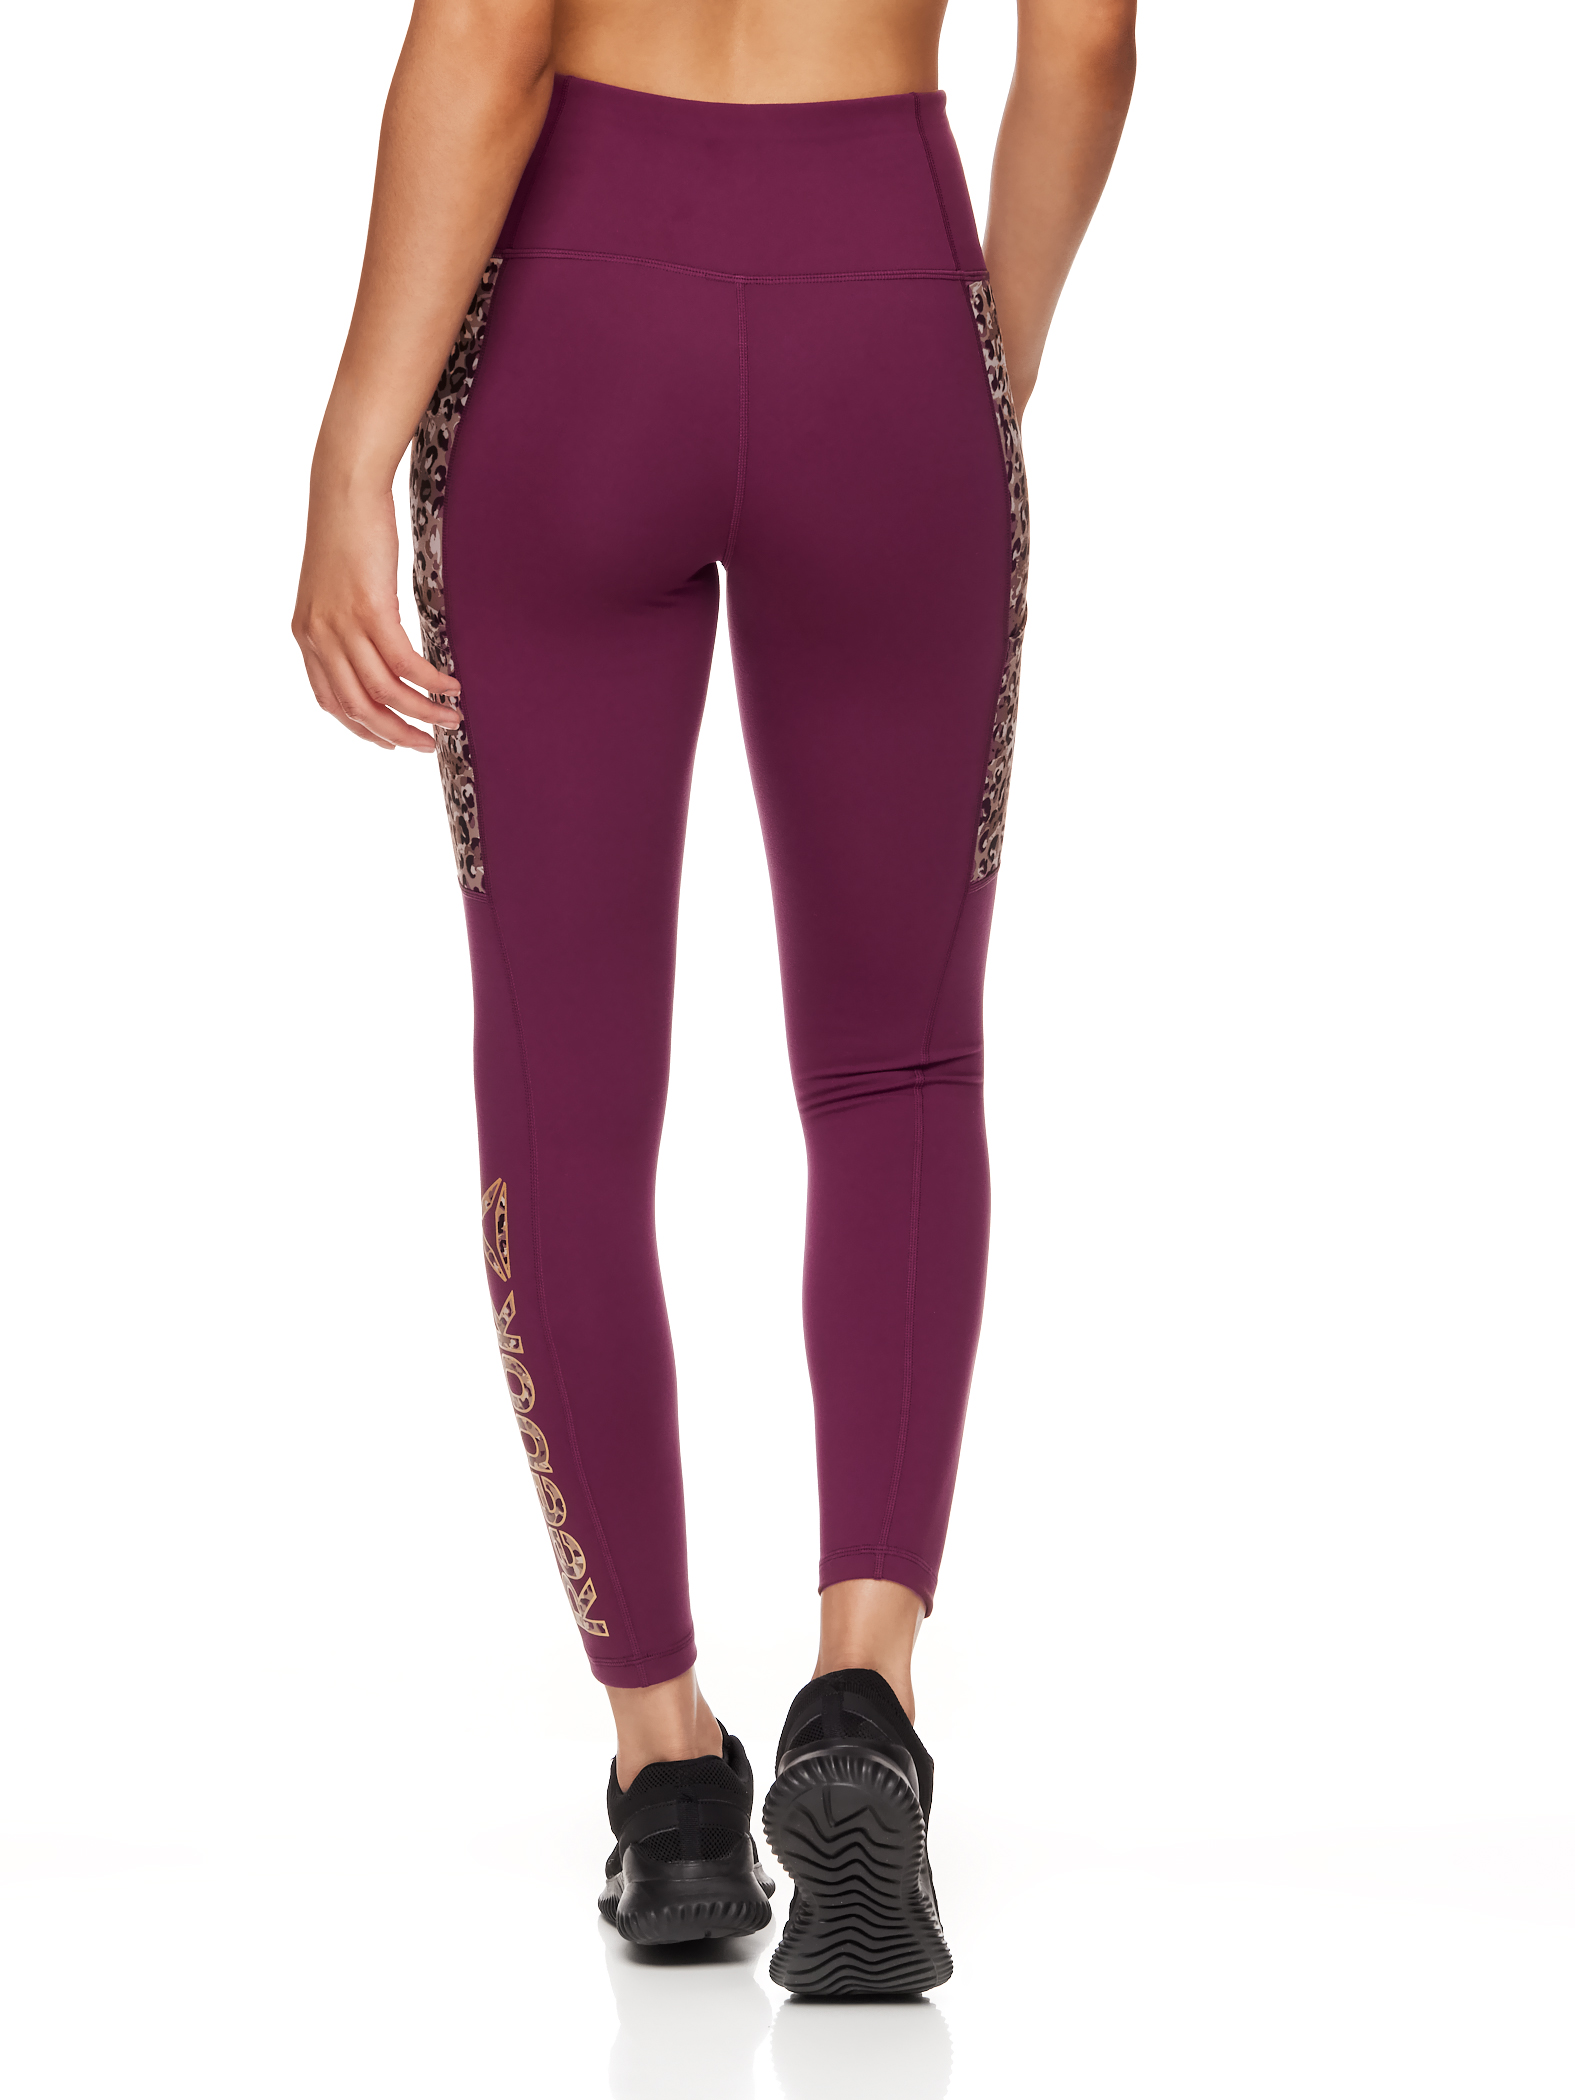 Reebok Women's Printed Motion High Rise 7/8 Legging with Side Pocket - image 3 of 4